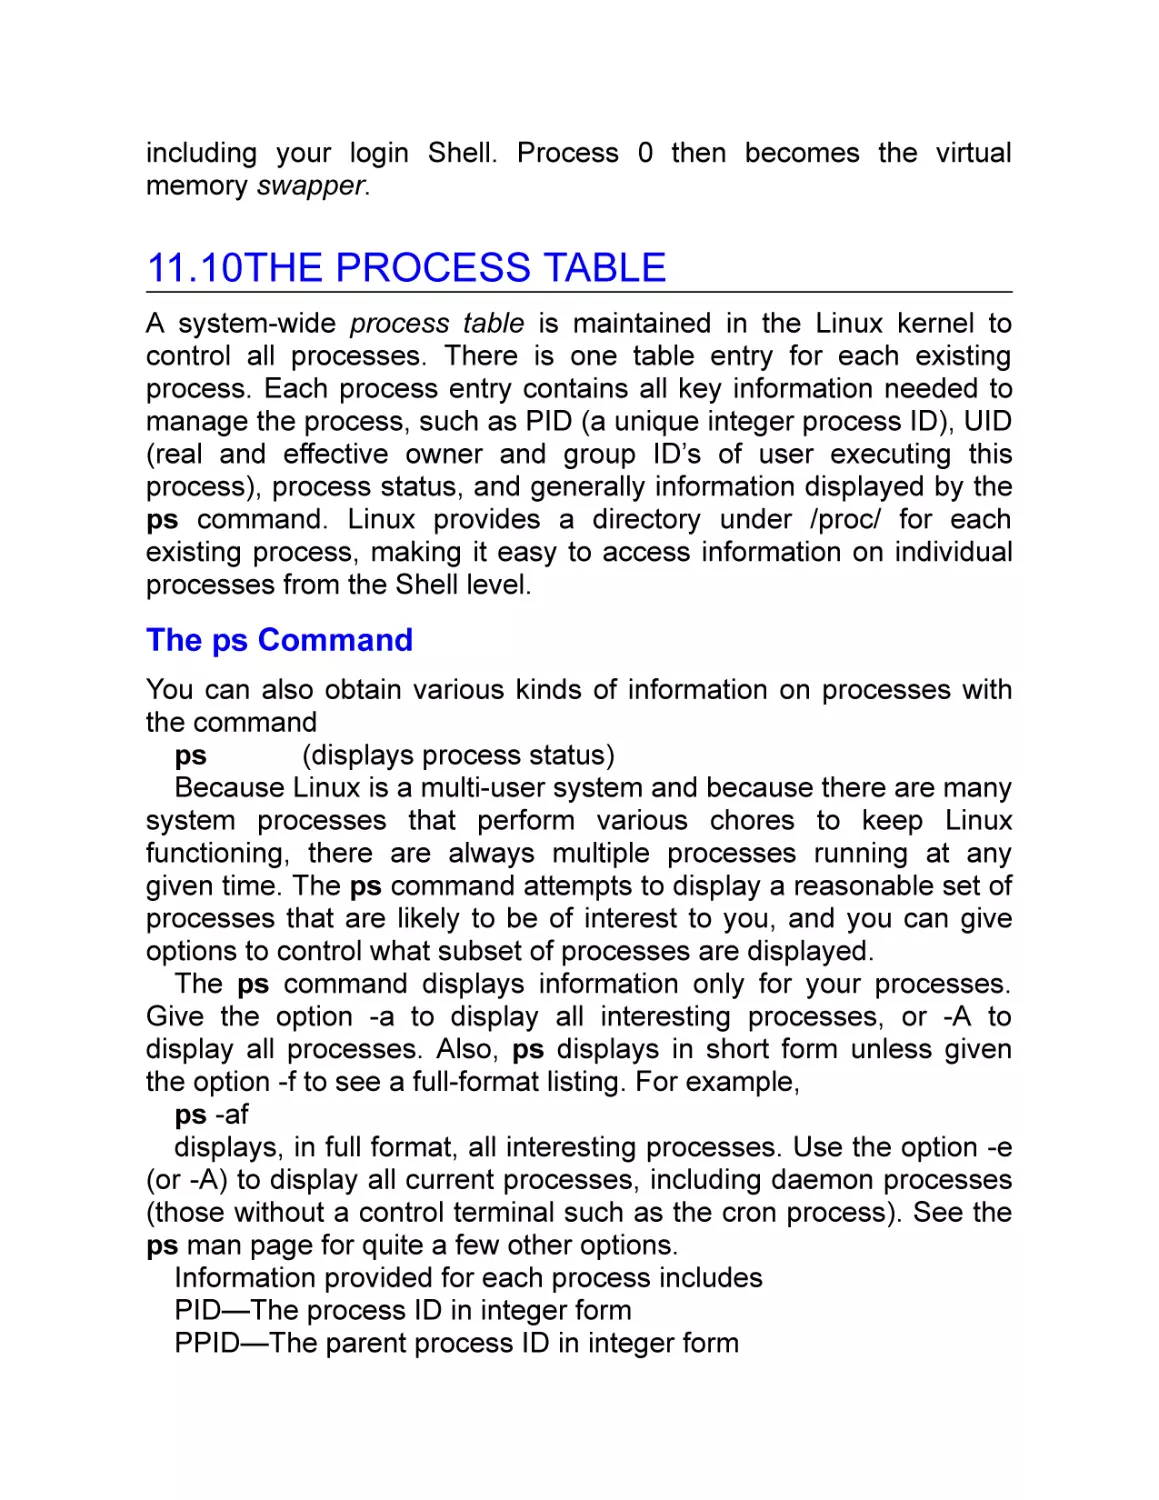 11.10 The Process Table
The ps Command